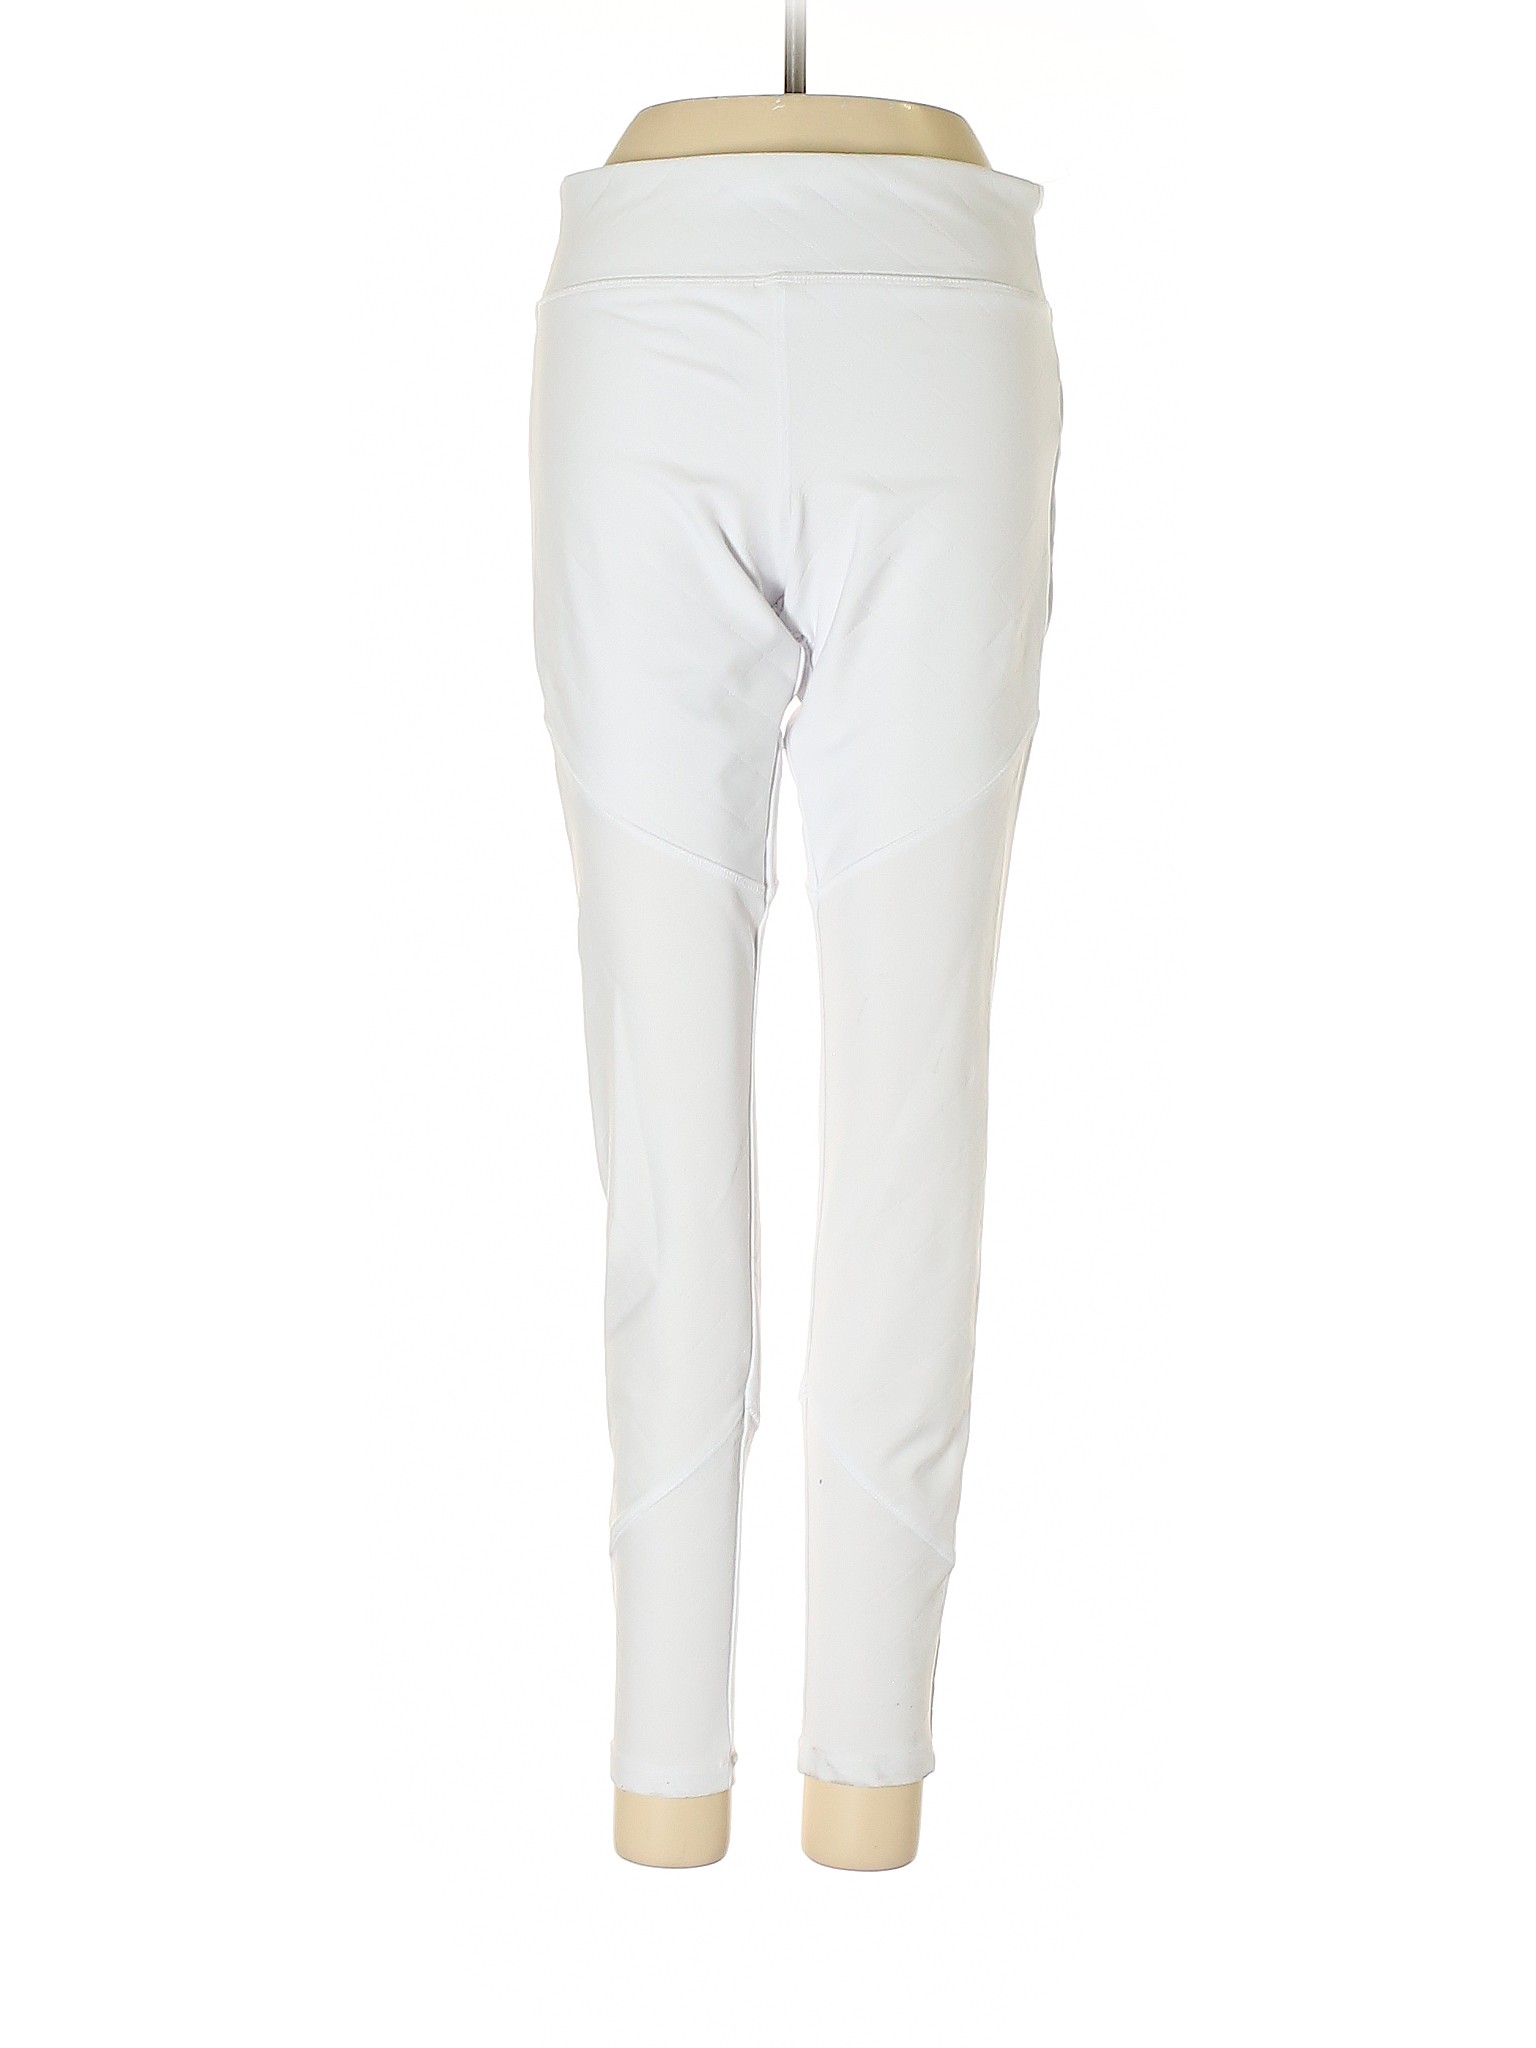 Forever 21 Solid White Active Pants Size S - 55% off | thredUP